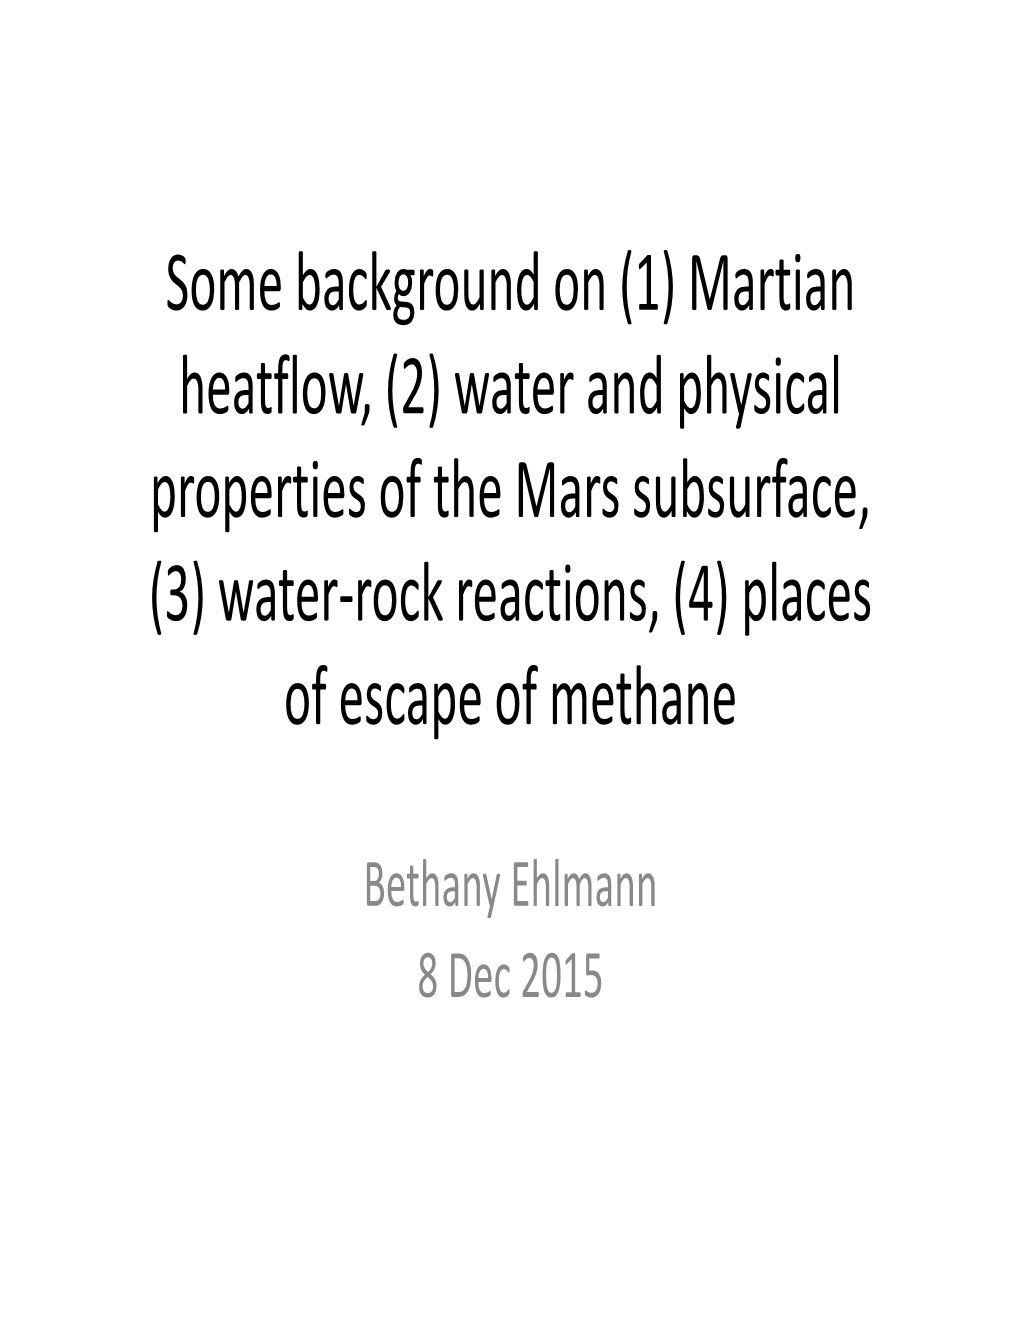 Some Background on (1) Martian Heatflow, (2) Water and Physical Properties of the Mars Subsurface, (3) Water‐Rock Reactions, (4) Places of Escape of Methane